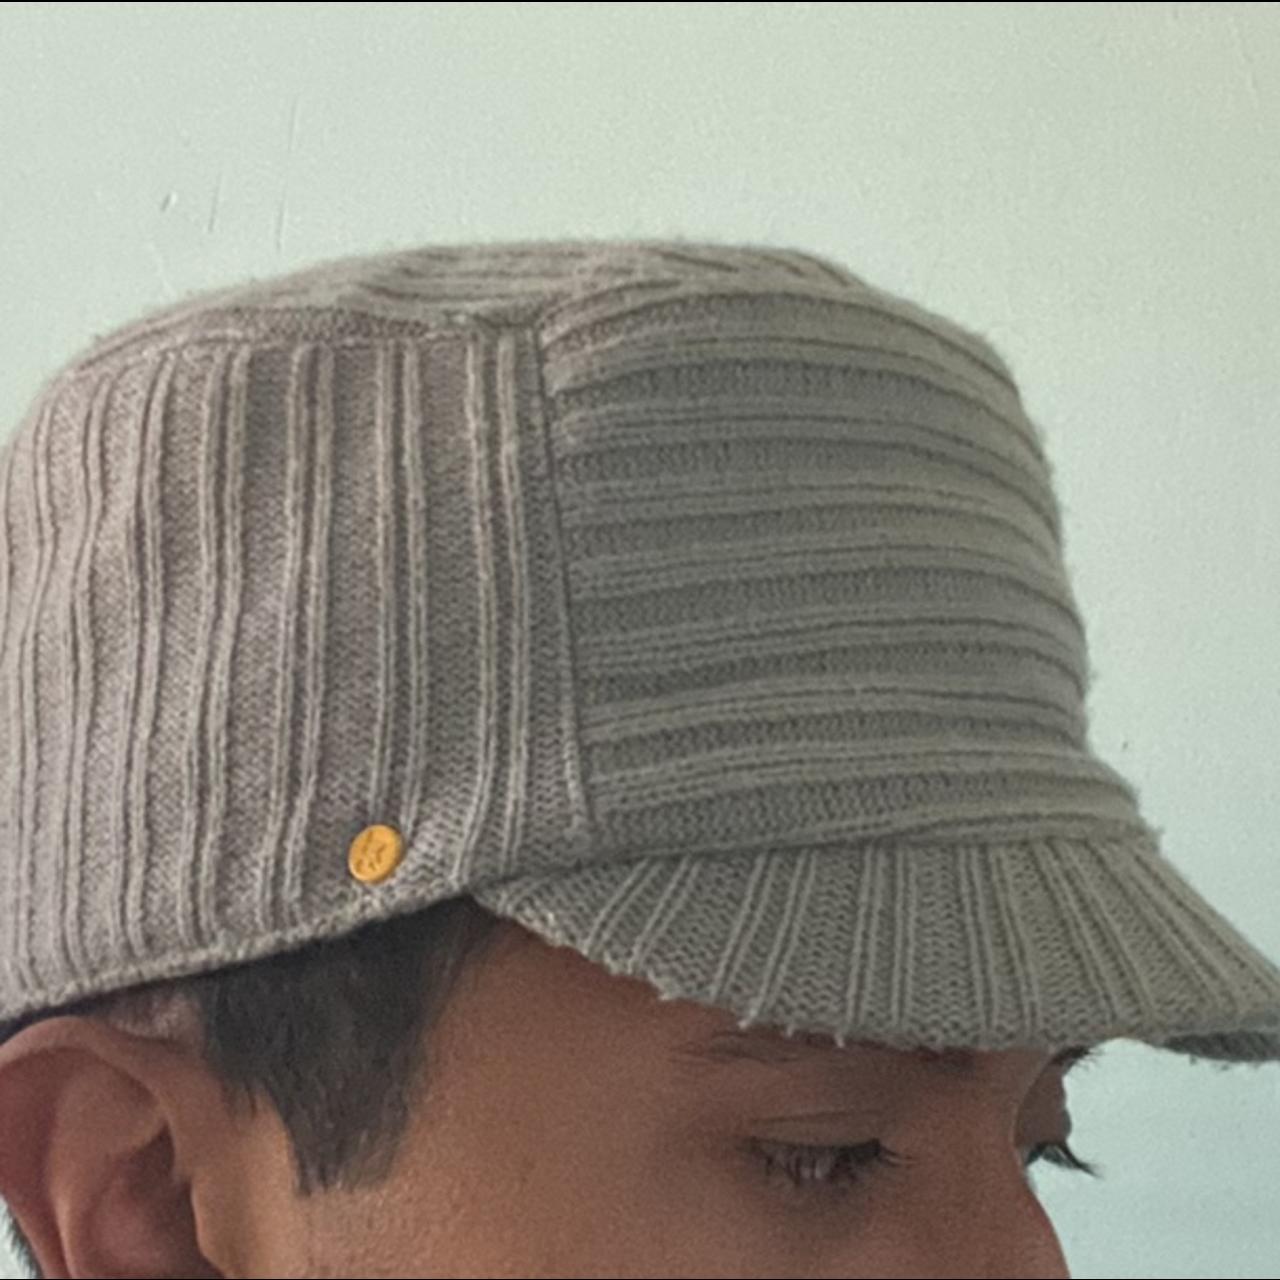 Product Image 1 - Caterpillar knitted newsboy cap. Size: